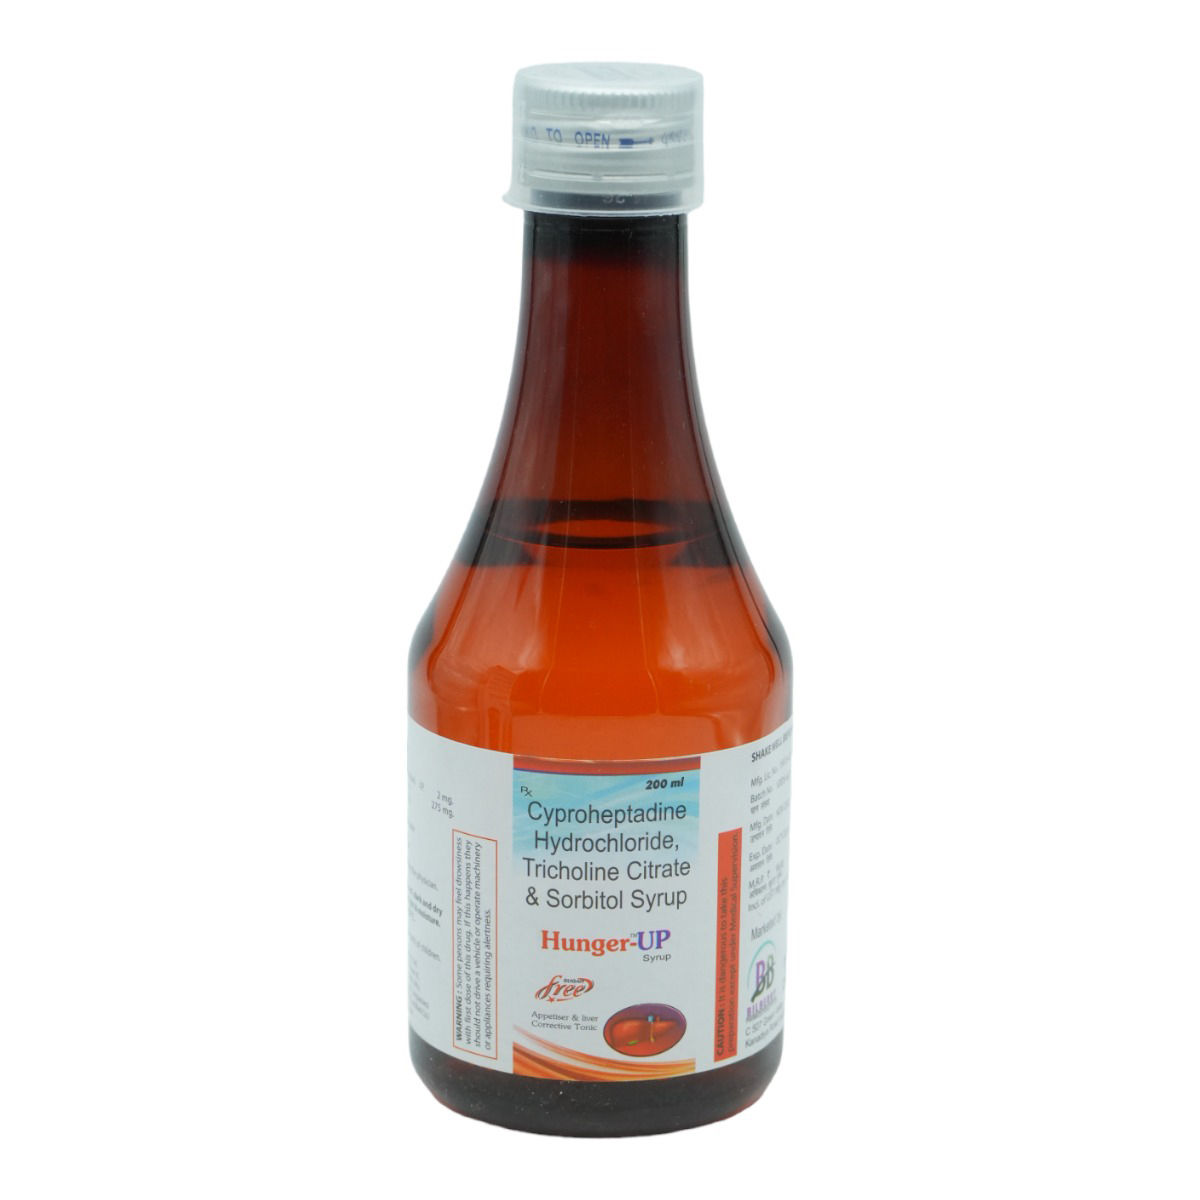 Buy Hunger-UP Sugar Free Syrup 200 ml Online